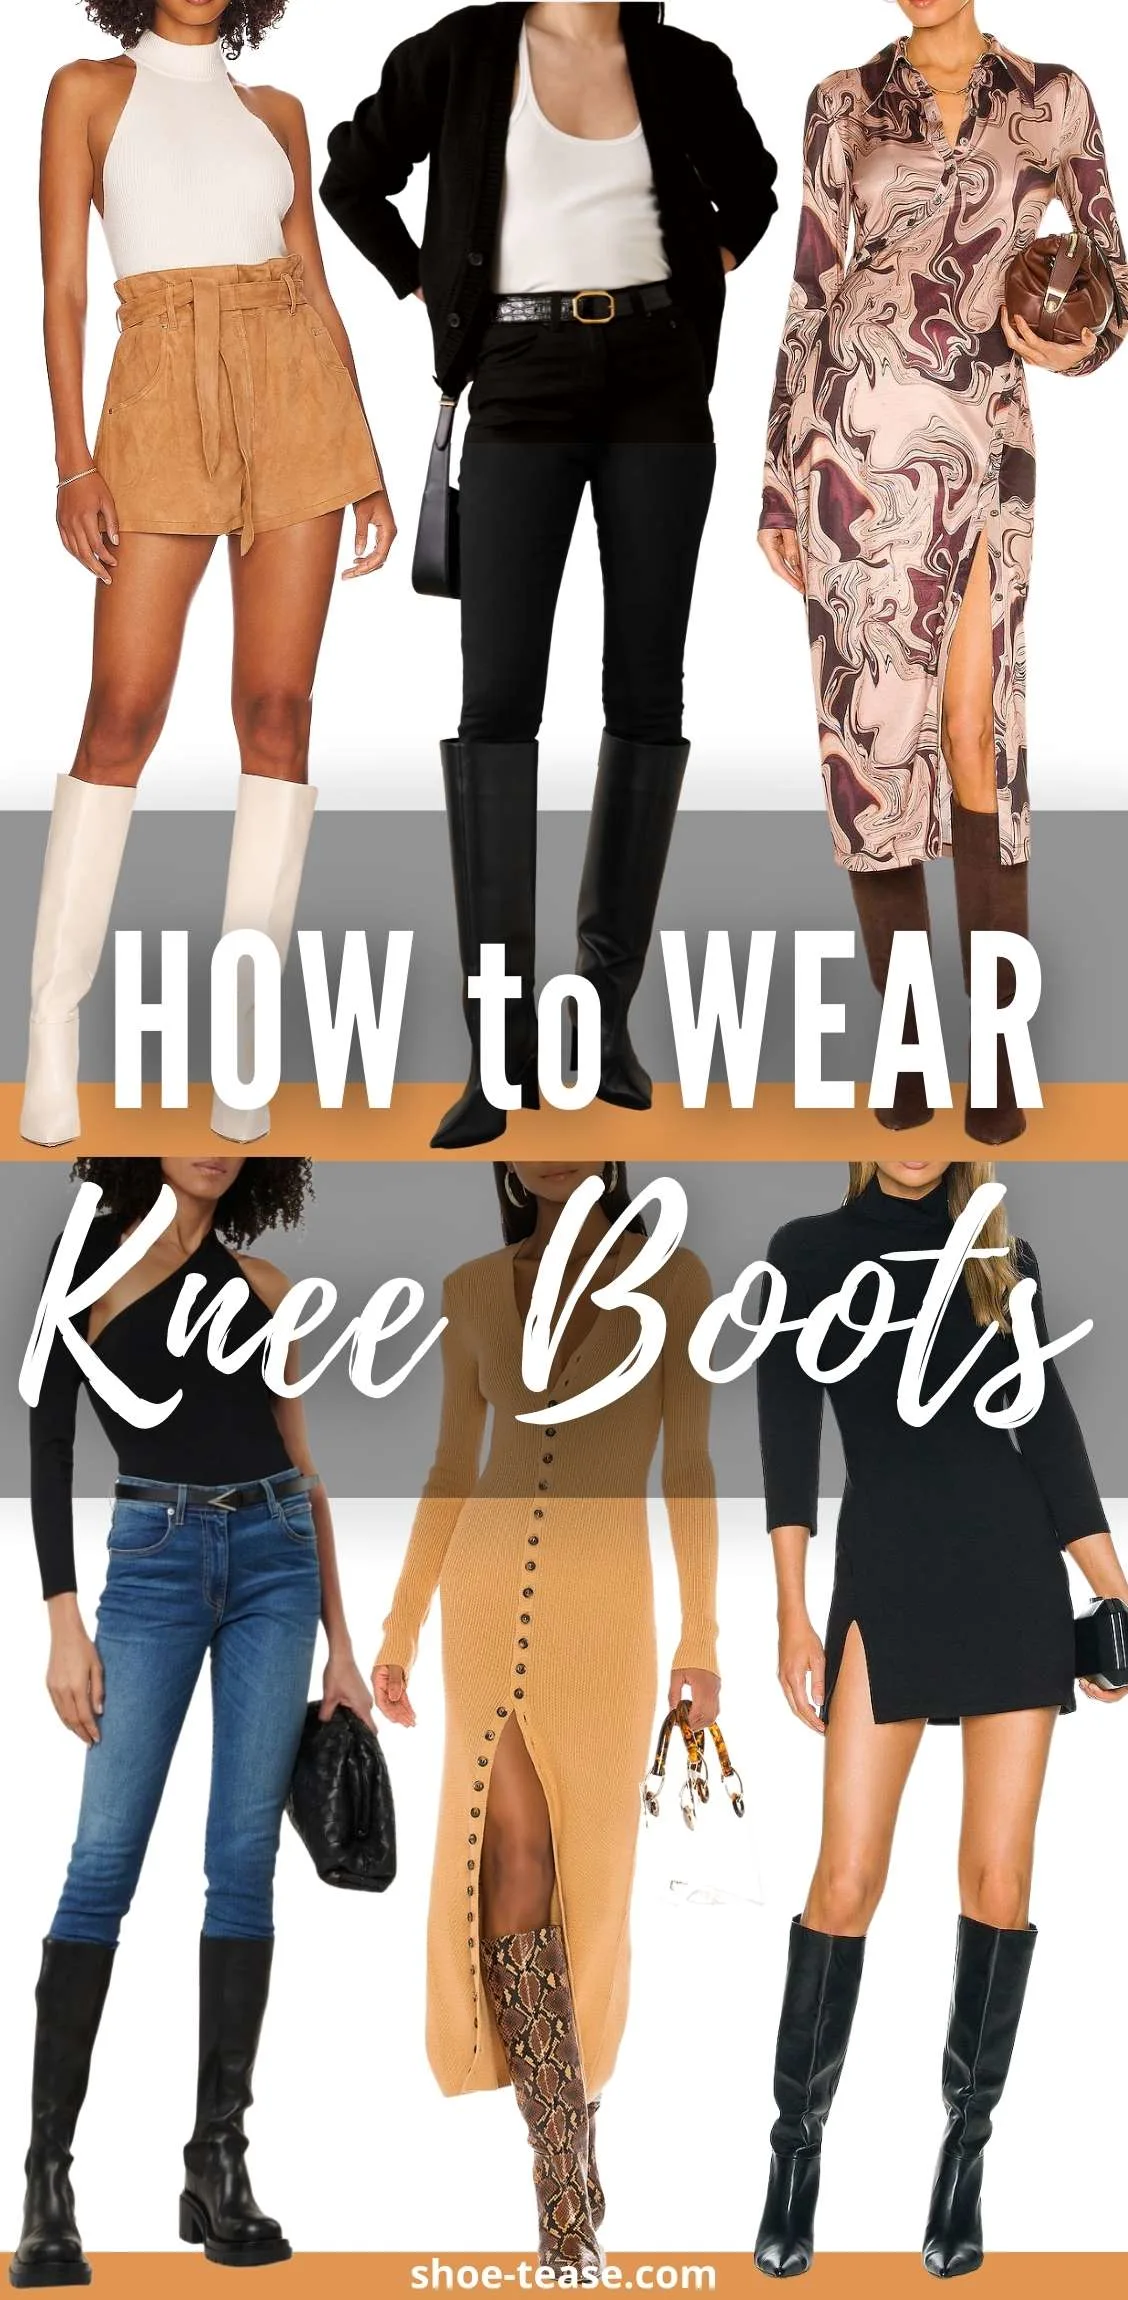 Collage of 6 women wearing different knee high boots outfits heel outfits under text reading how to wear knee boots.